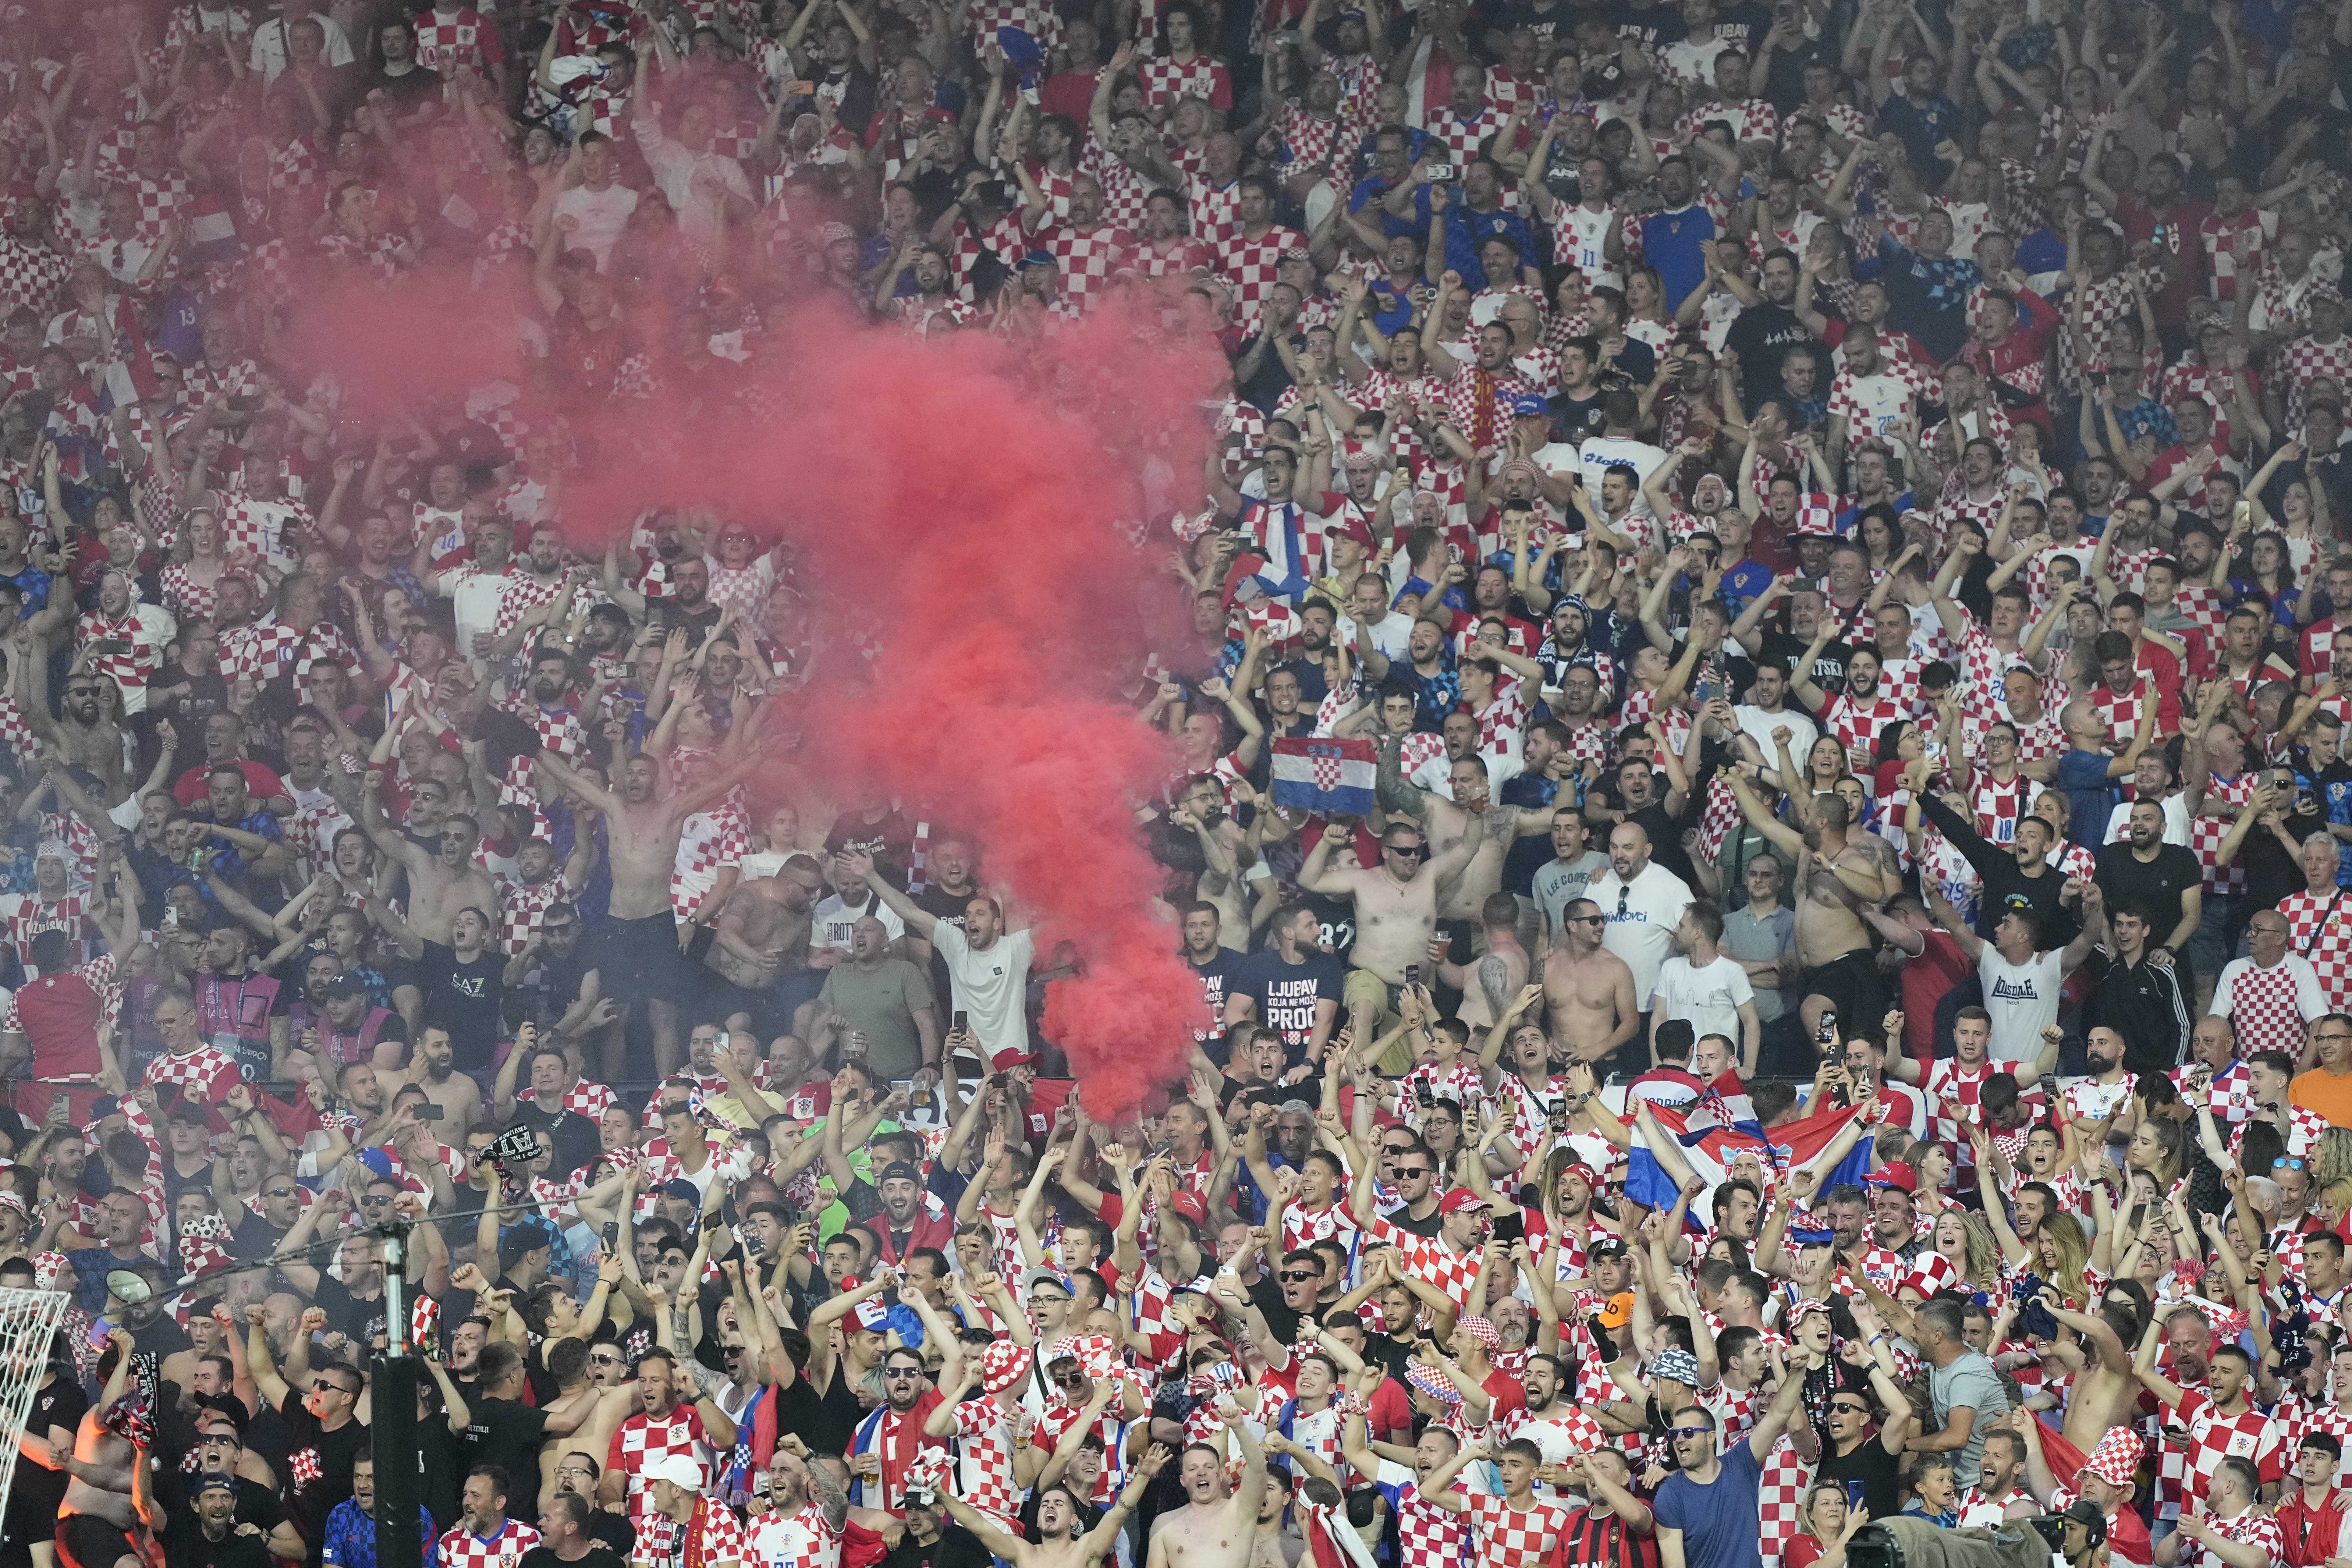 Hajduk Split fined nearly £50,000 over trouble and racist chants